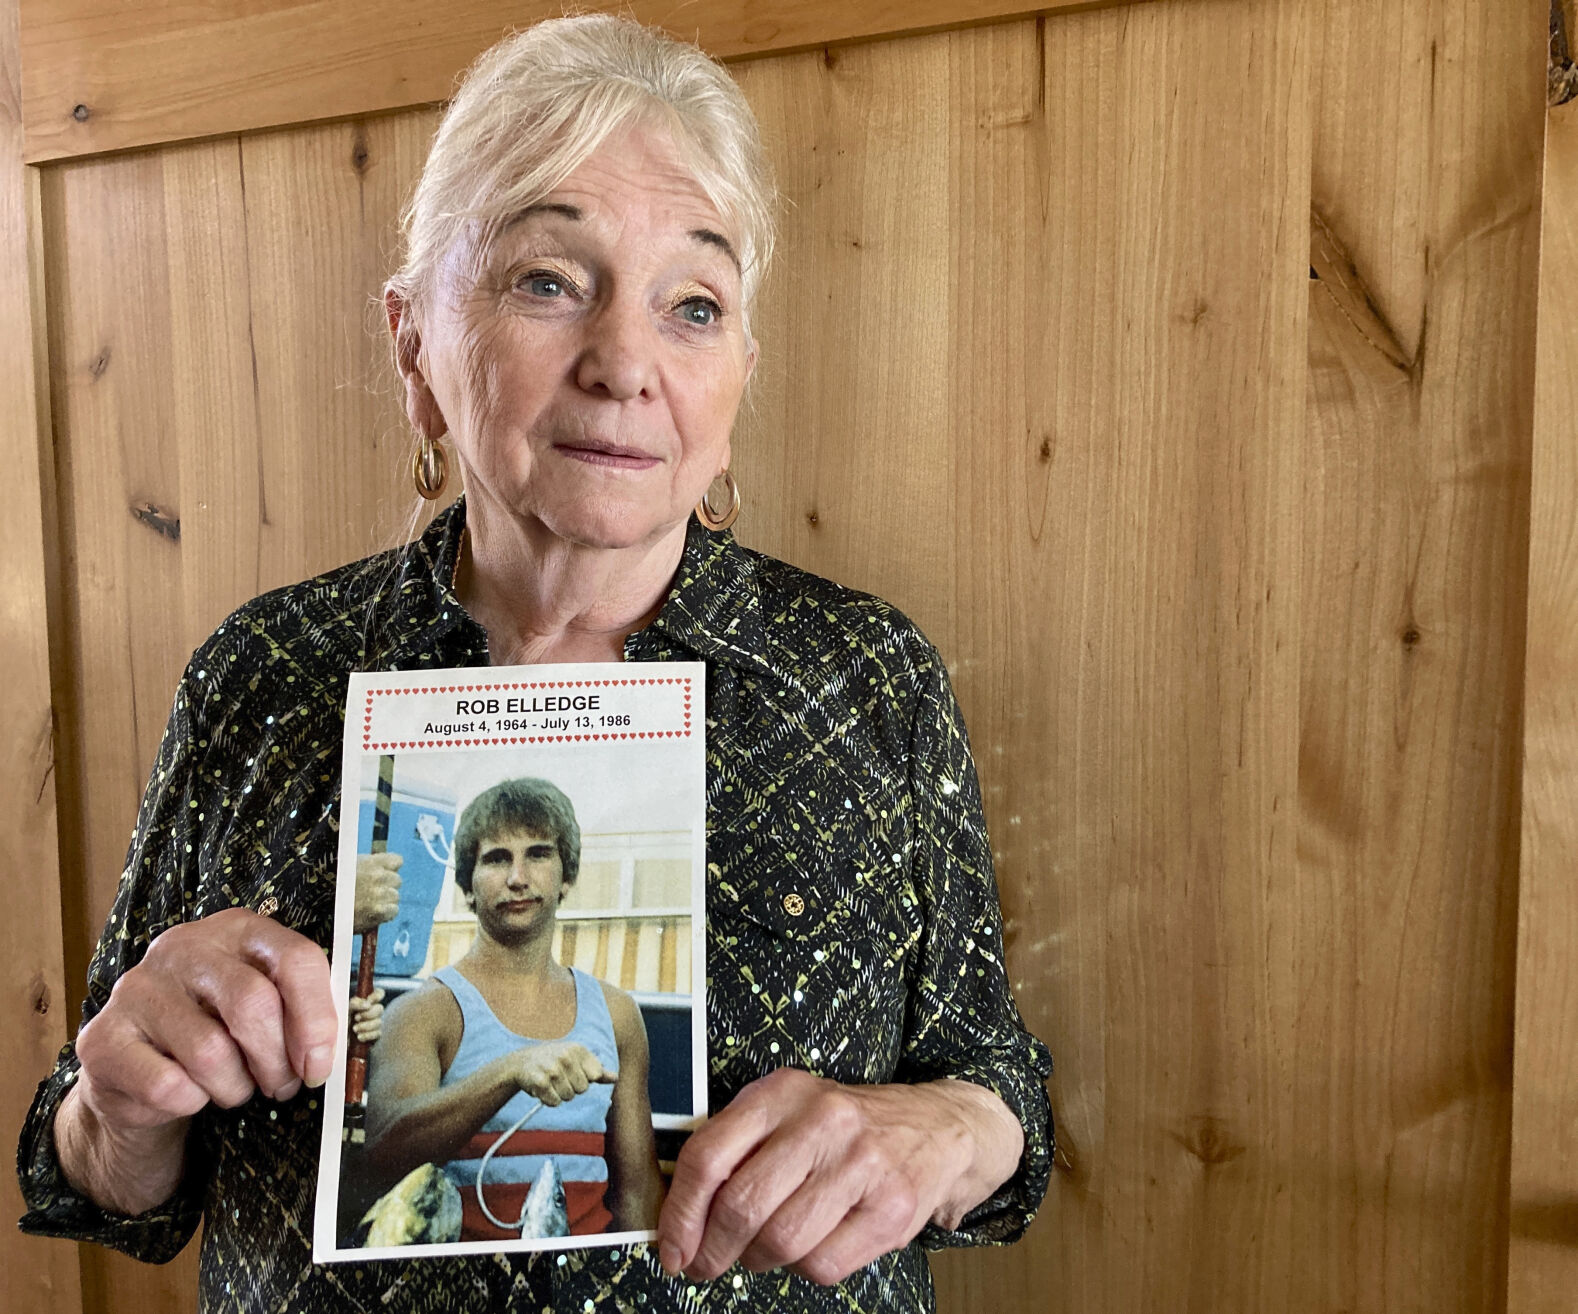 <p>Mary Elledge holds a photograph of a picture taken in Oregon City, Ore., of her only son, Rob Elledge, on Oct. 27, 2022, who was murdered in 1986. Elledge, president of the Portland chapter of Parents of Murdered Children, is a registered Democrat but this November she will vote for the independent candidate for Oregon governor because she feels Democrats are too progressive on issues like bail and sentencing reform and early release. (AP Photo/Gillian Flaccus)</p>   PHOTO CREDIT: Gillian Flaccus - staff, AP